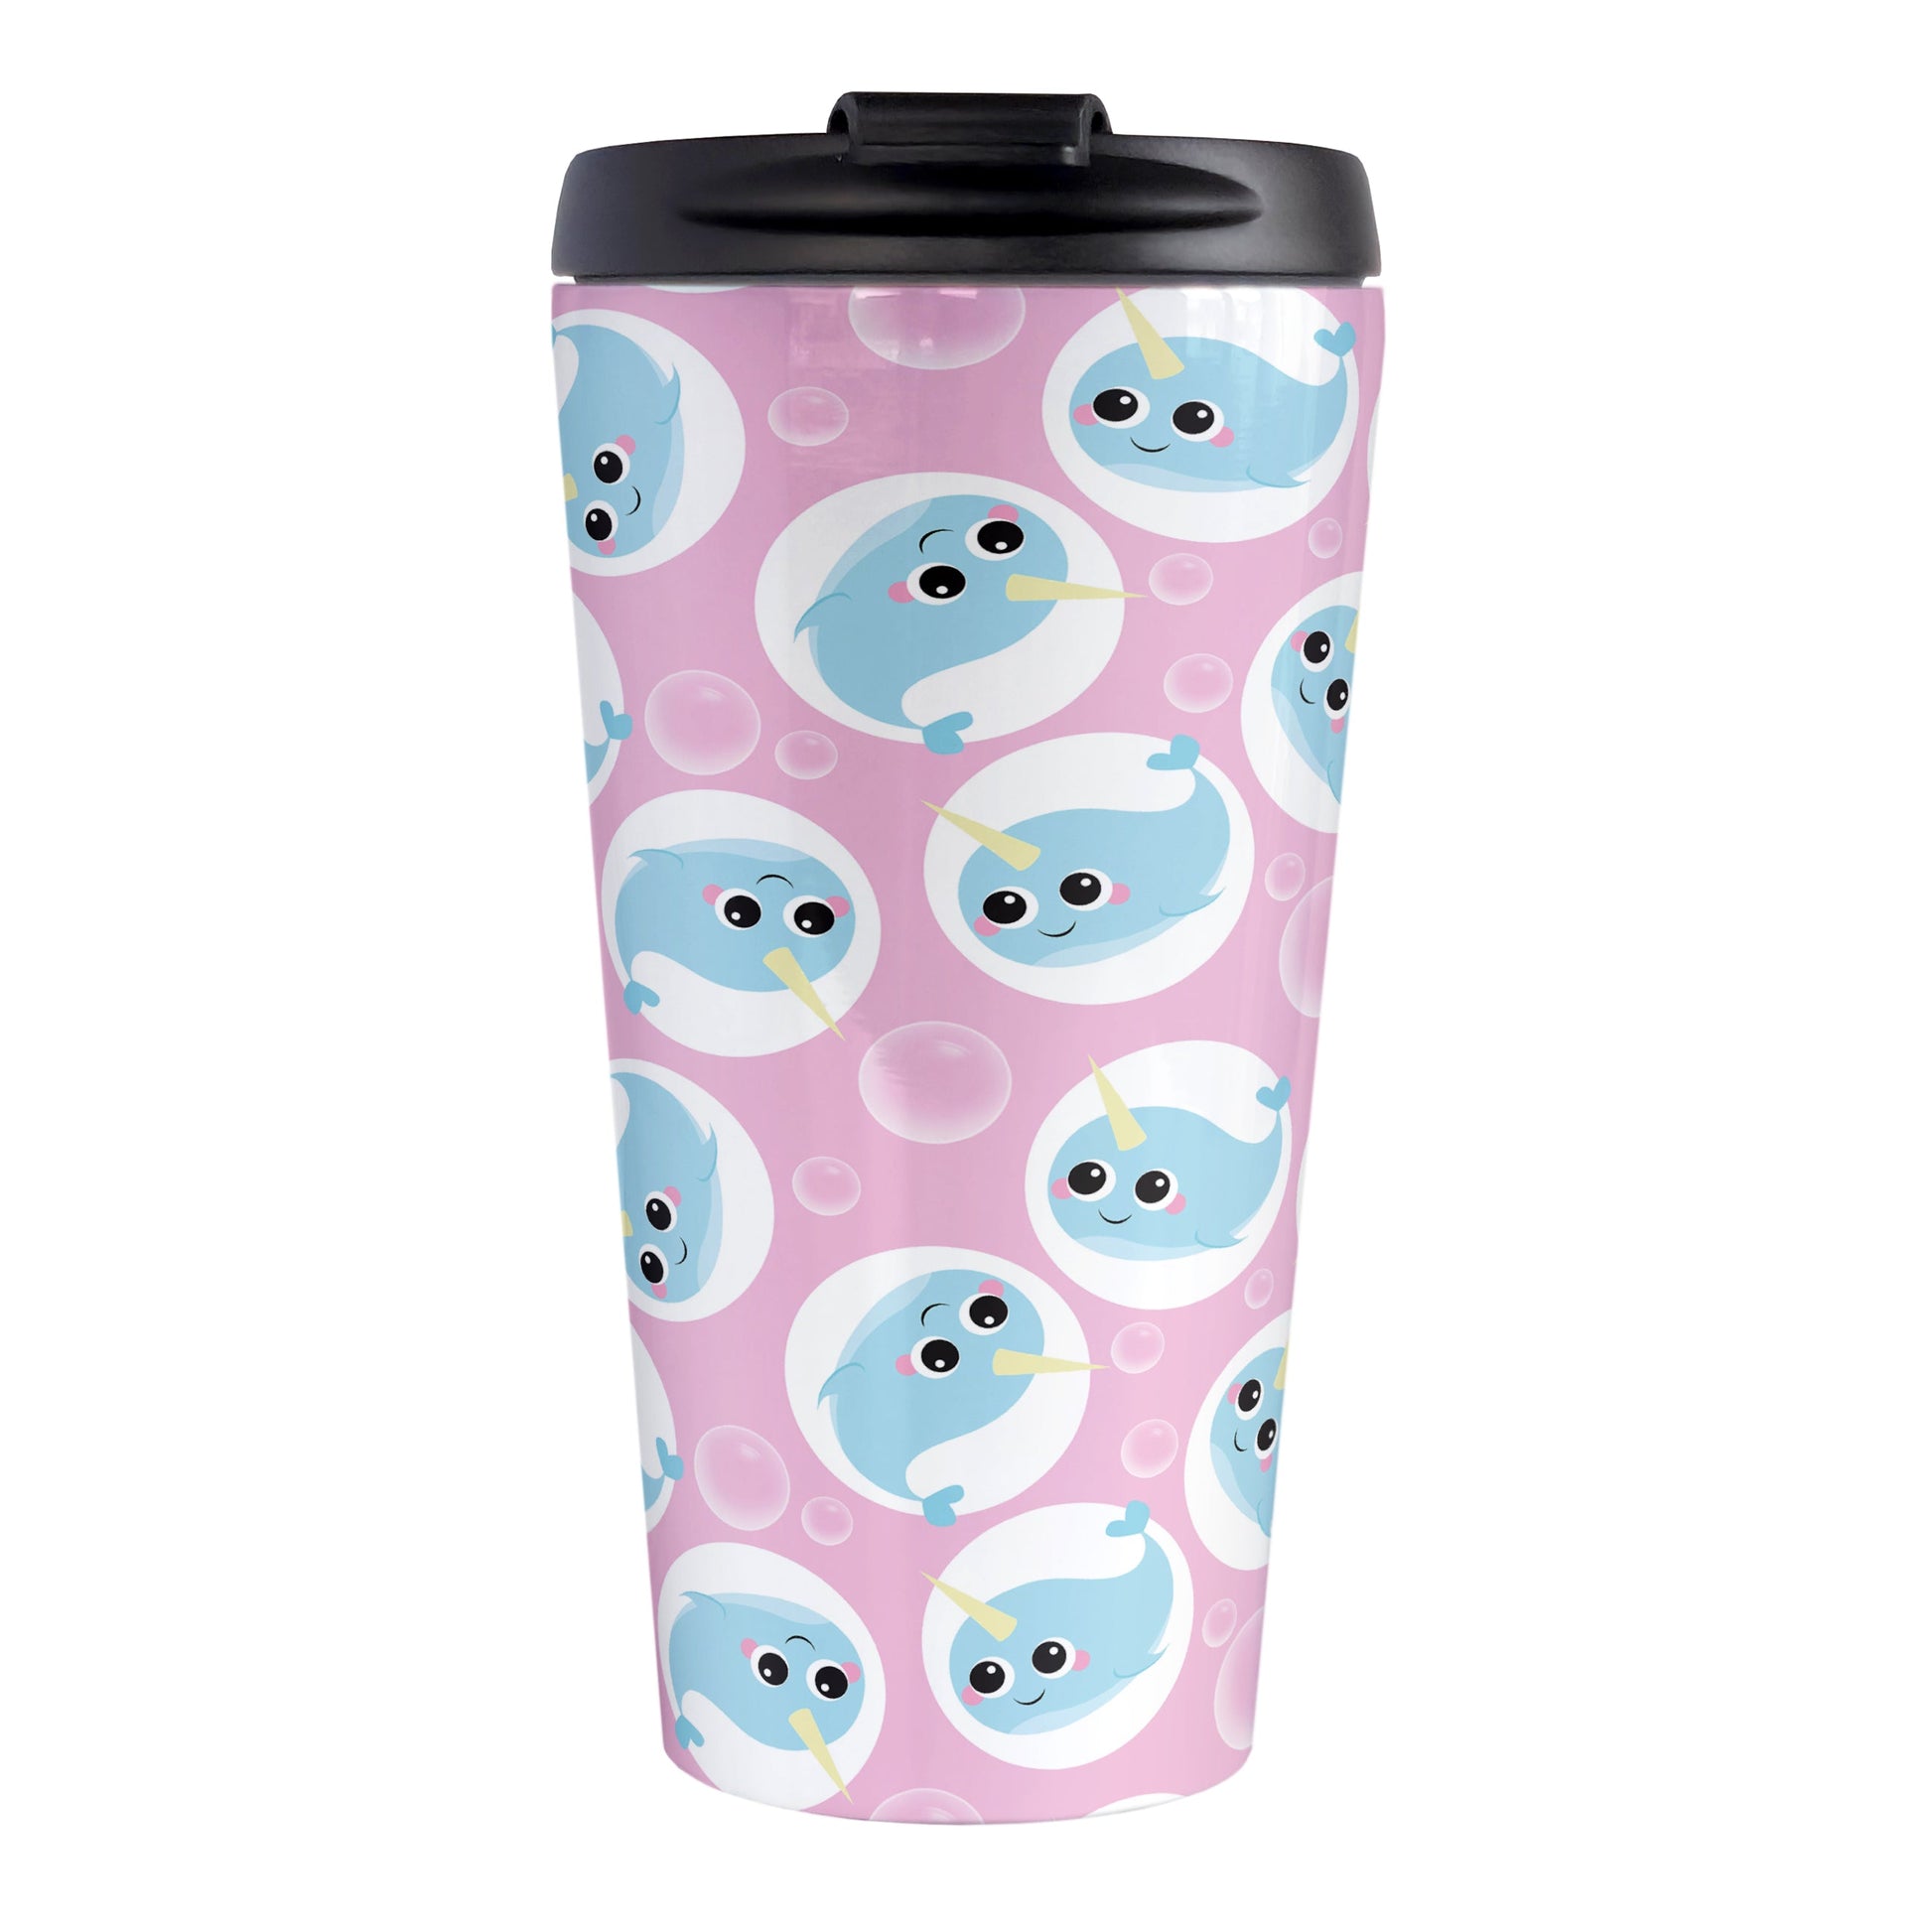 Cute Pink Narwhal Bubble Pattern Travel Mug (15oz, stainless steel insulated) at Amy's Coffee Mugs